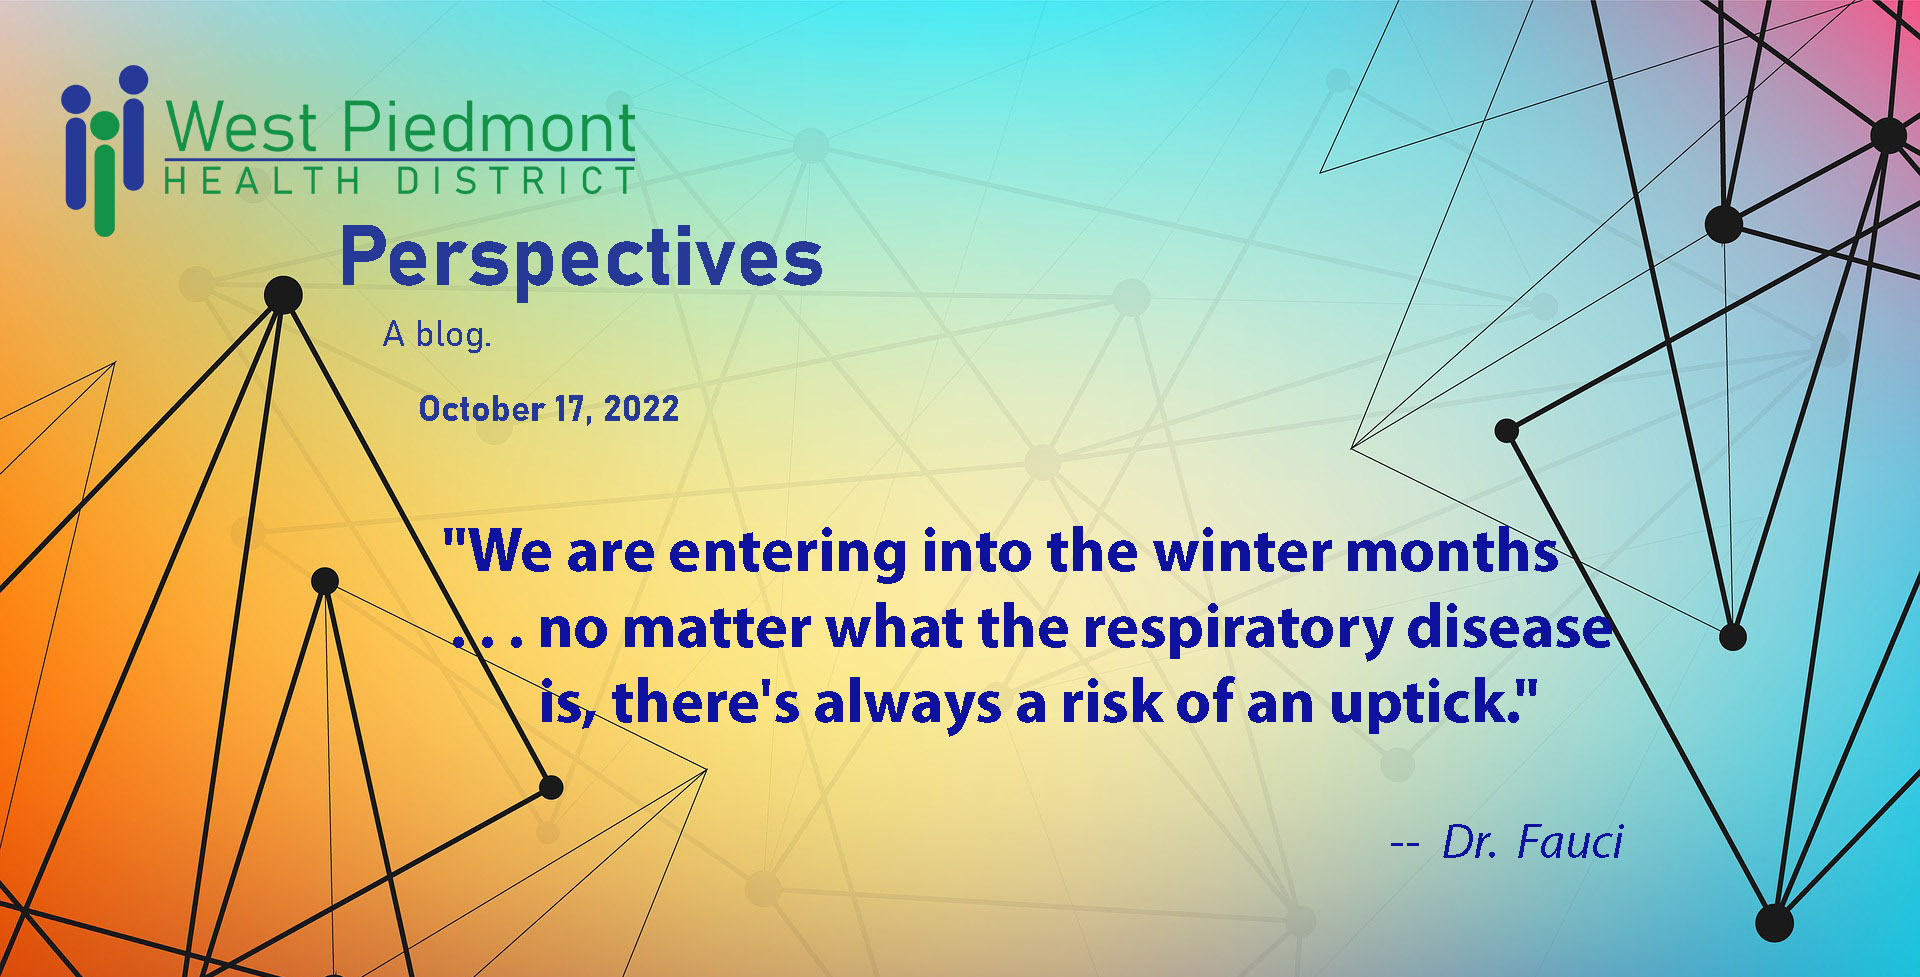 Cover quote: We are entering the winter months ...no matter what the respiratory disease there's always a risk of an uptick. Dr. Fauci